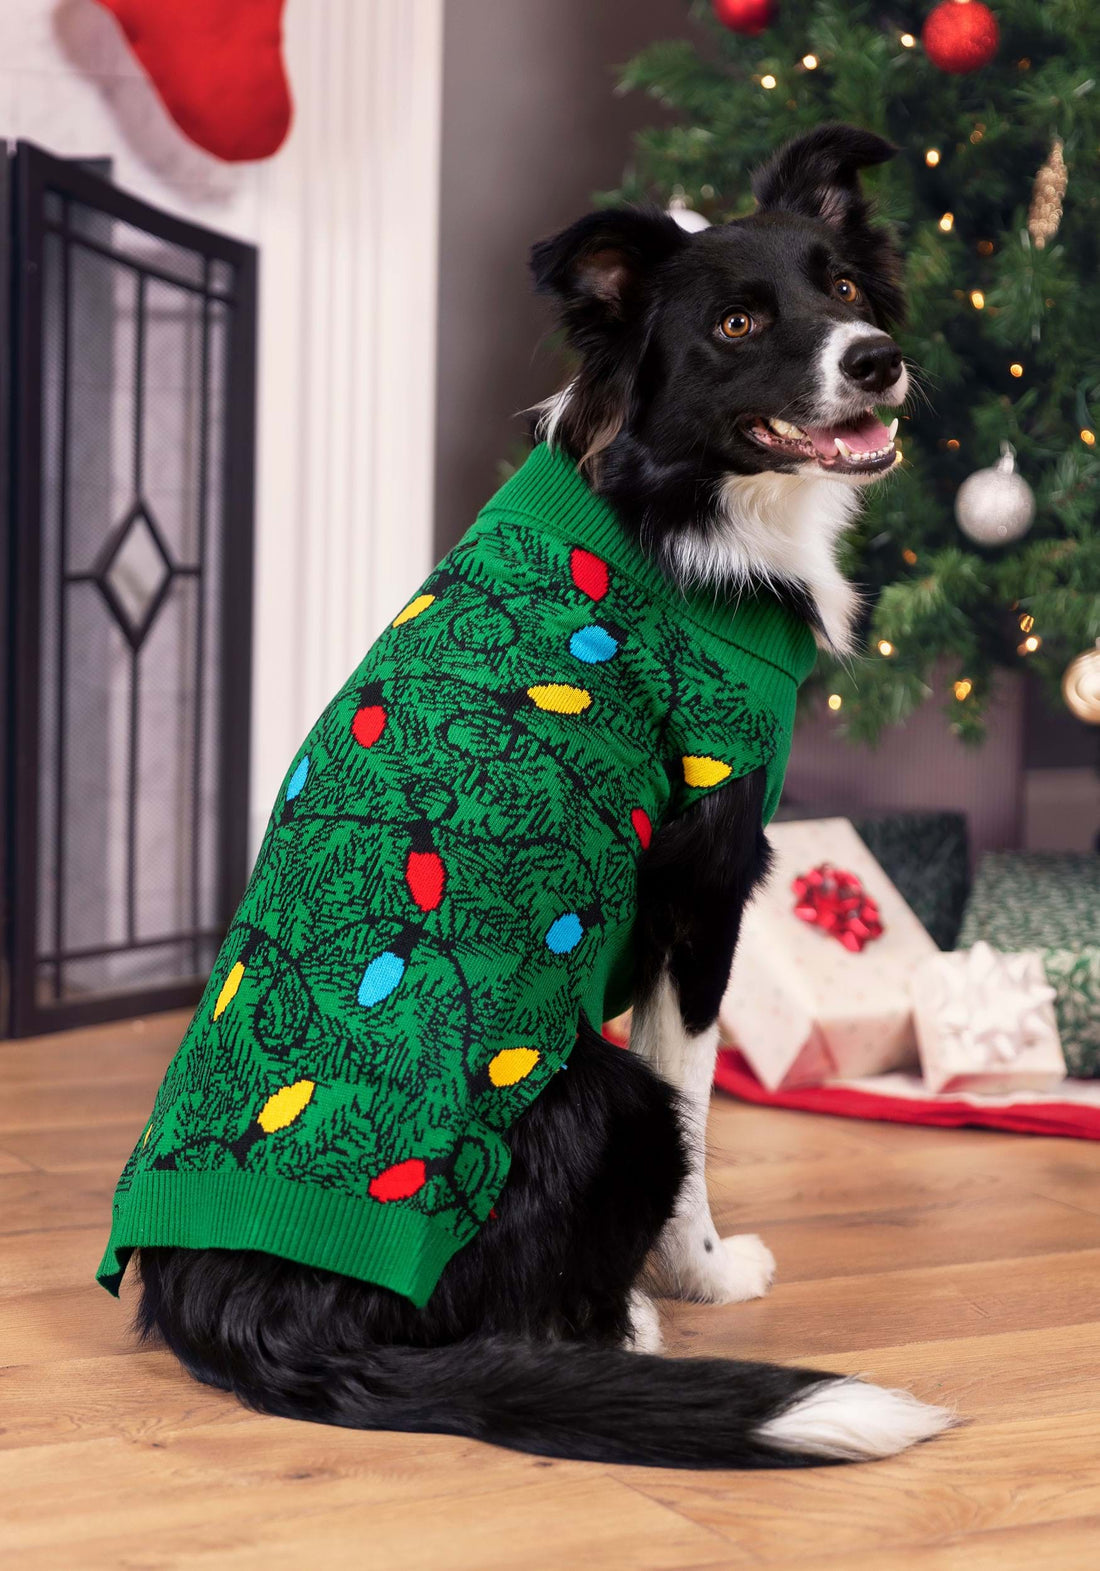 Does your dog need a dog sweater? 